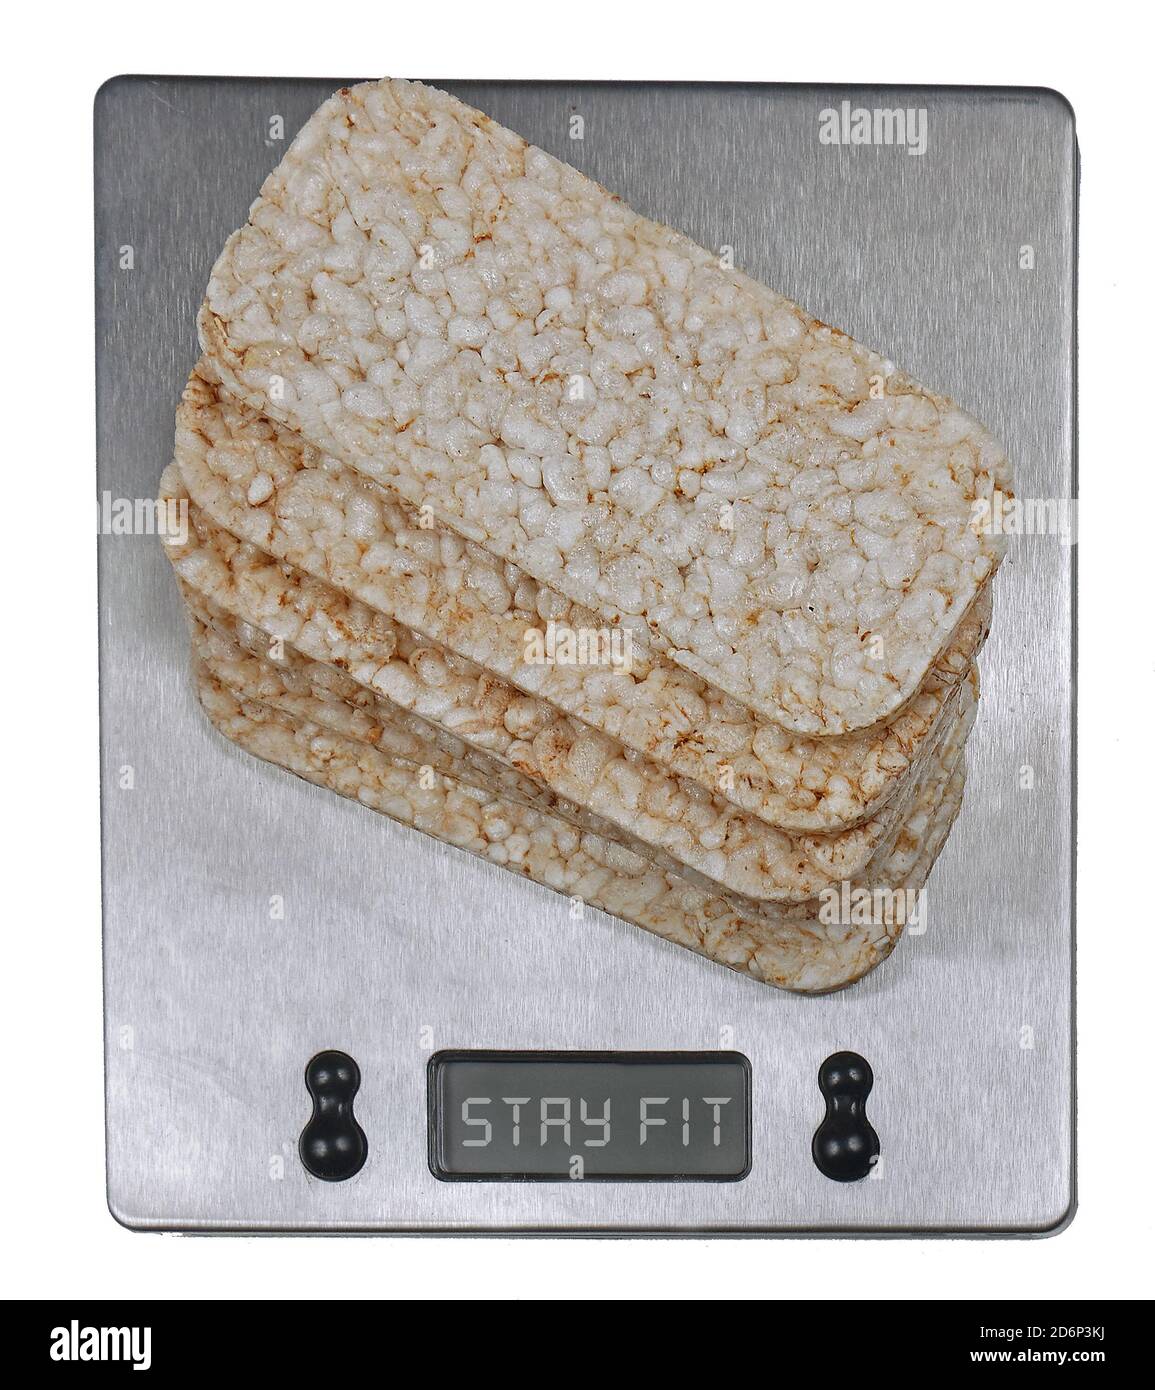 Rice crackers on digital kitchen scale promoting healthy eating lifestyle Stock Photo